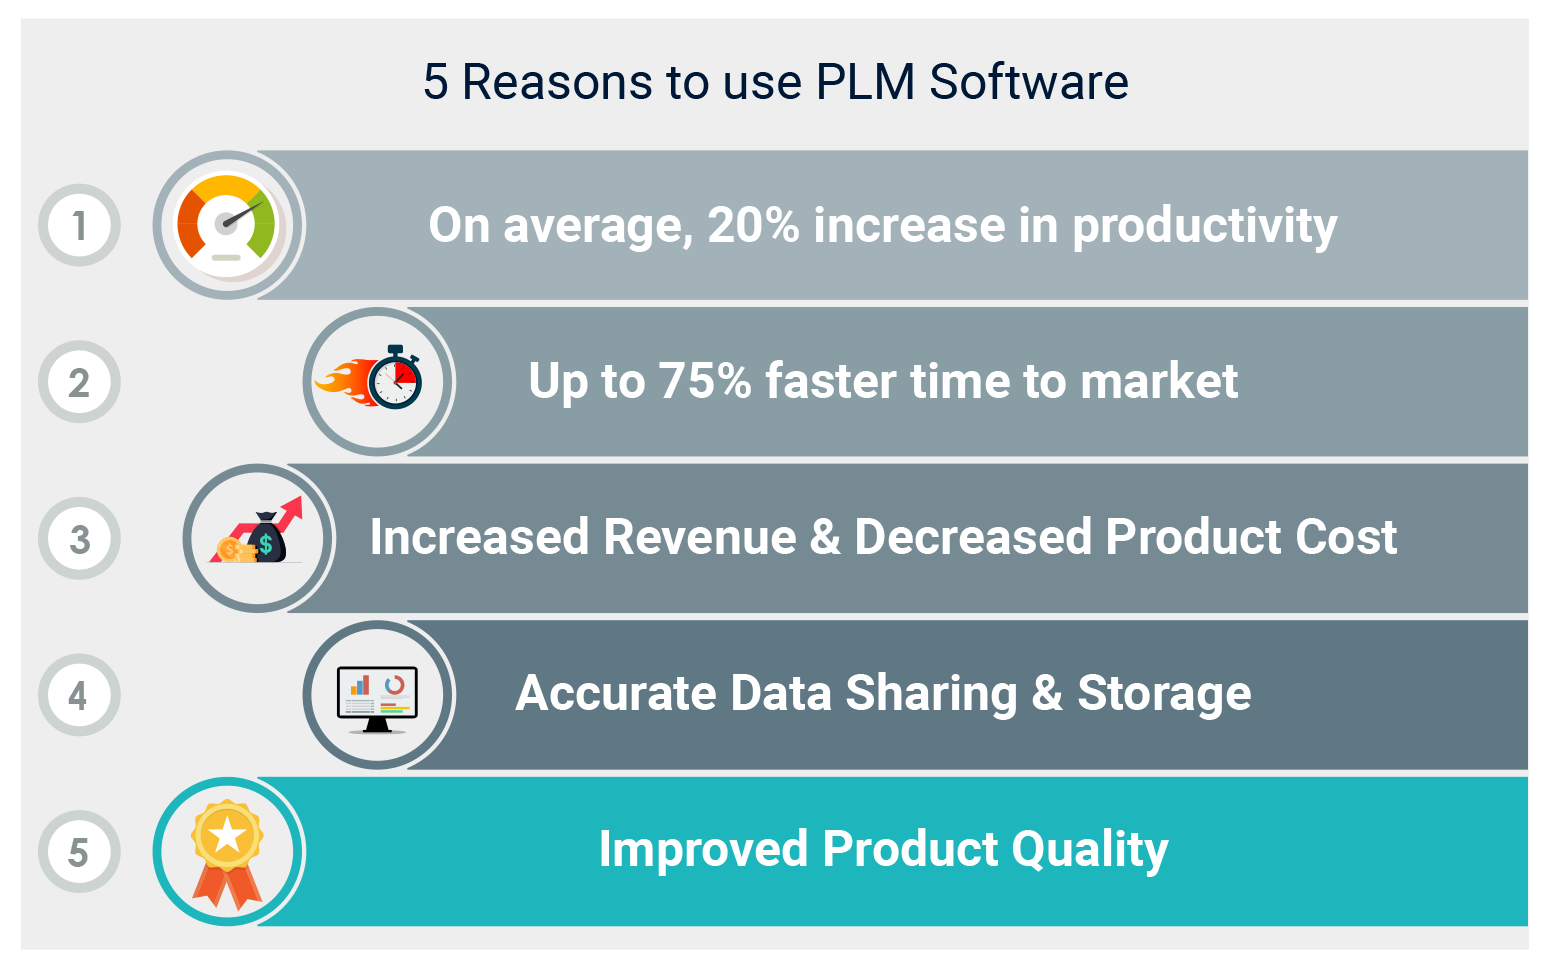 Reasons to use Product Lifecycle Management (PLM) Software